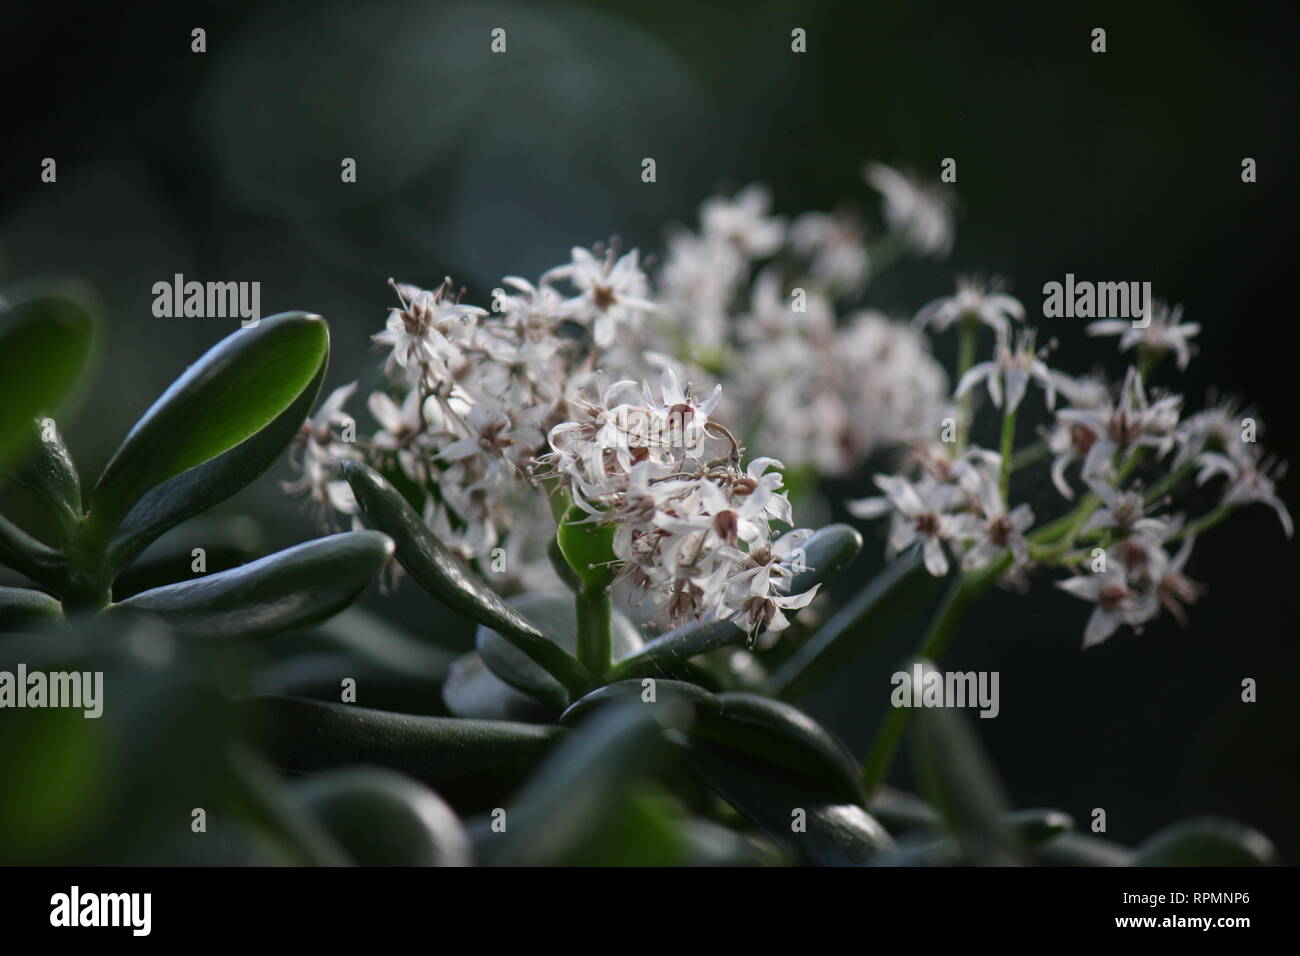 Flawless, stunning cultivated jade plant, lucky plant, money plant or money tree small white flowers. Stock Photo